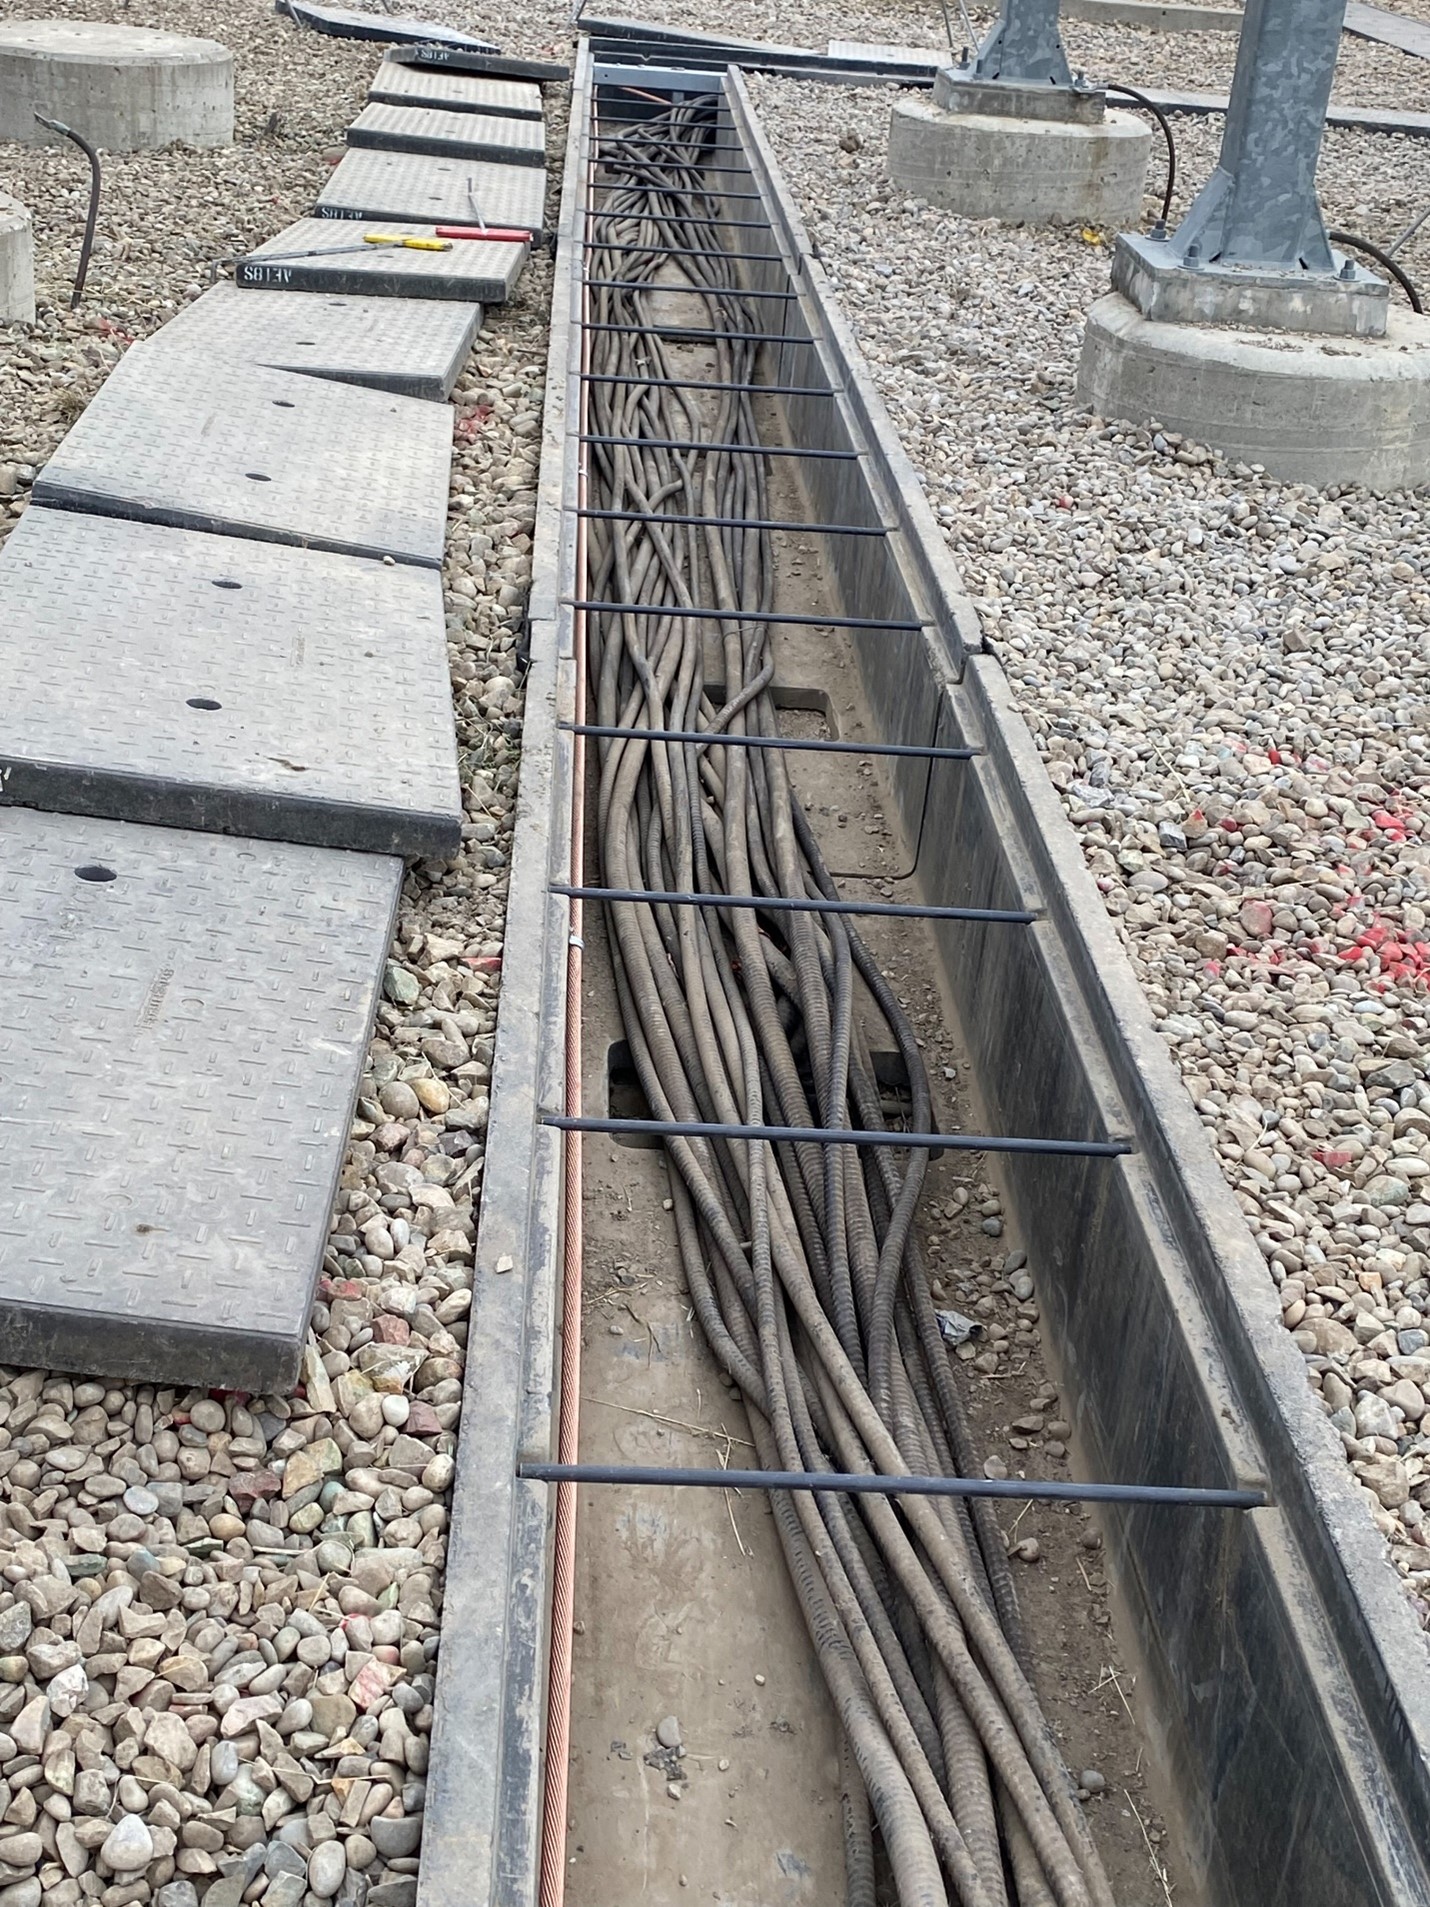 CABLE TRENCH